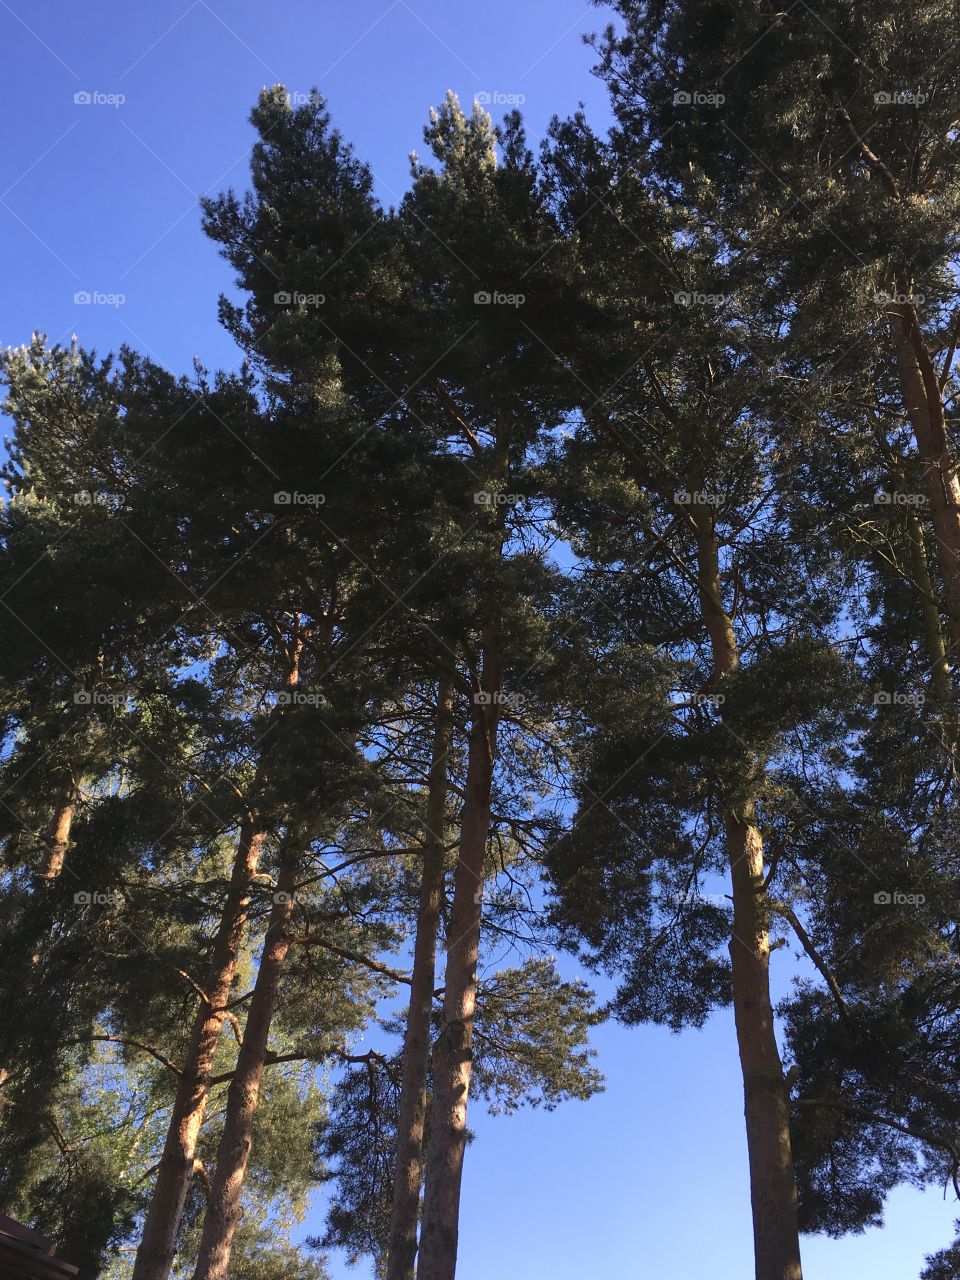 Tall pine trees in the English summer sunshine against a blue sky